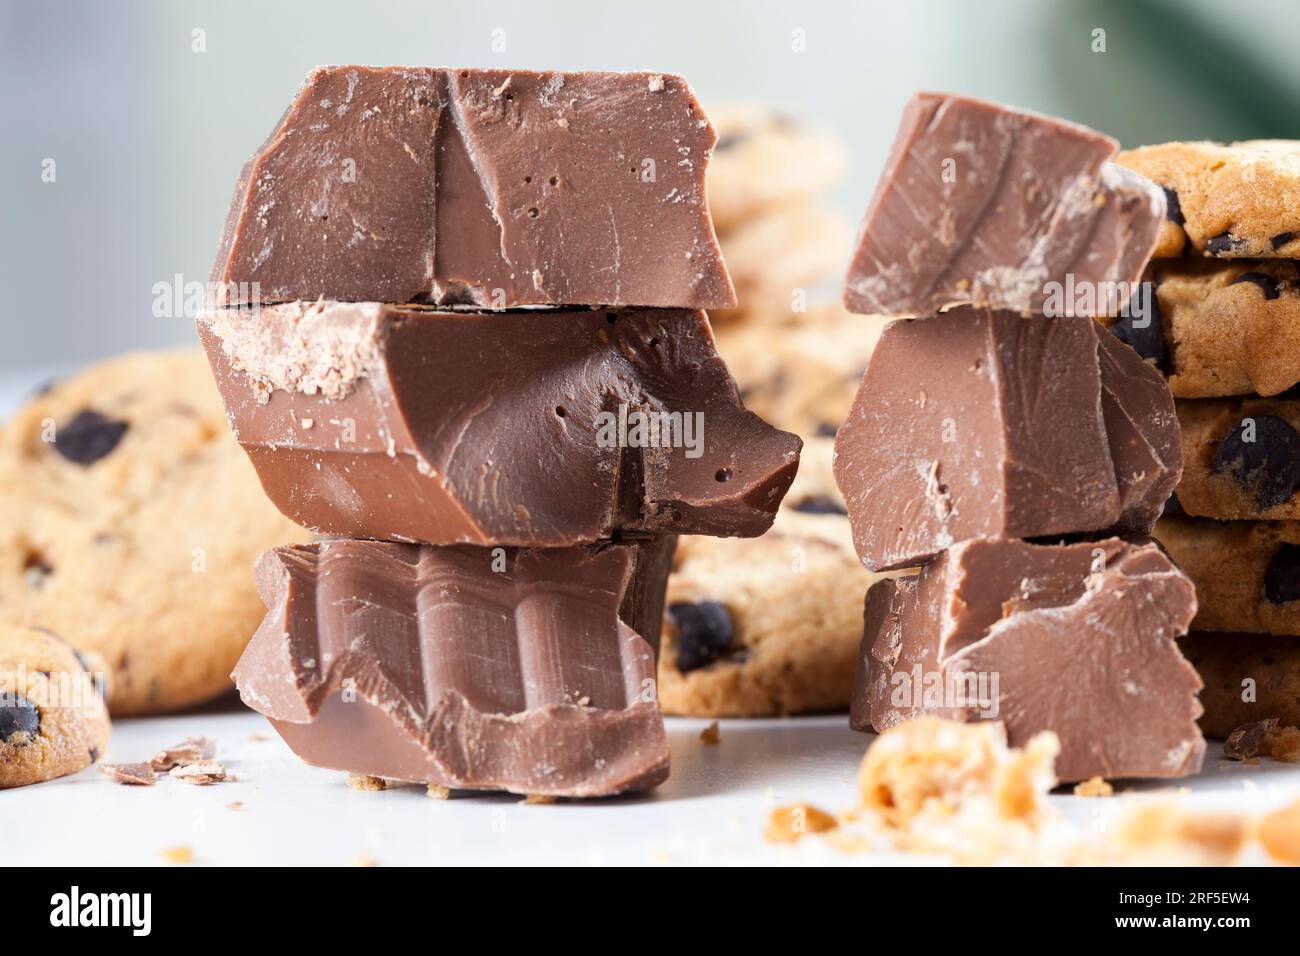 pieces of sweet chocolate together with cookies with pieces of chocolate inside as a filling, cookies with chocolate close up, cookies made of flour Stock Photo